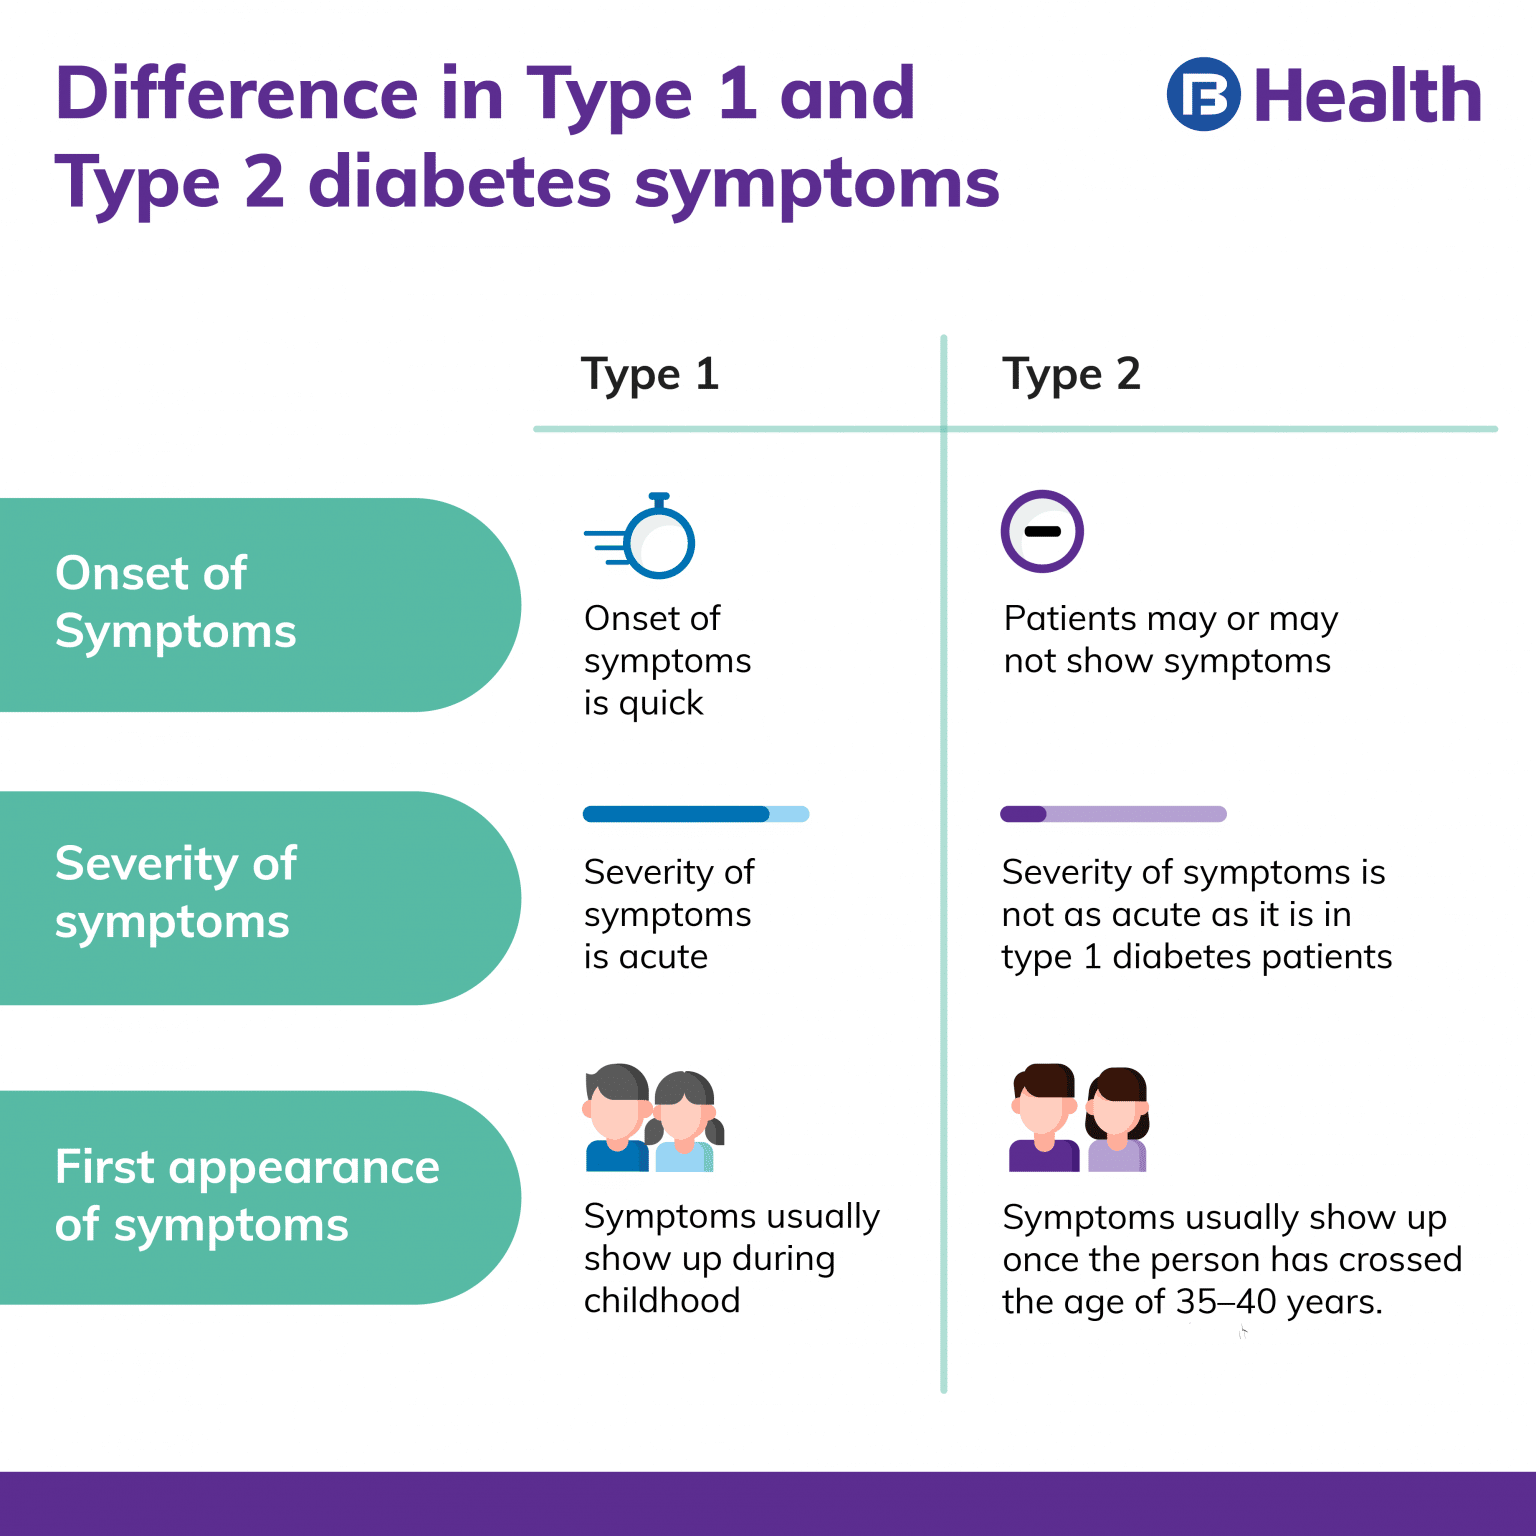 A guide to the difference between type 1 and type 2 diabetes